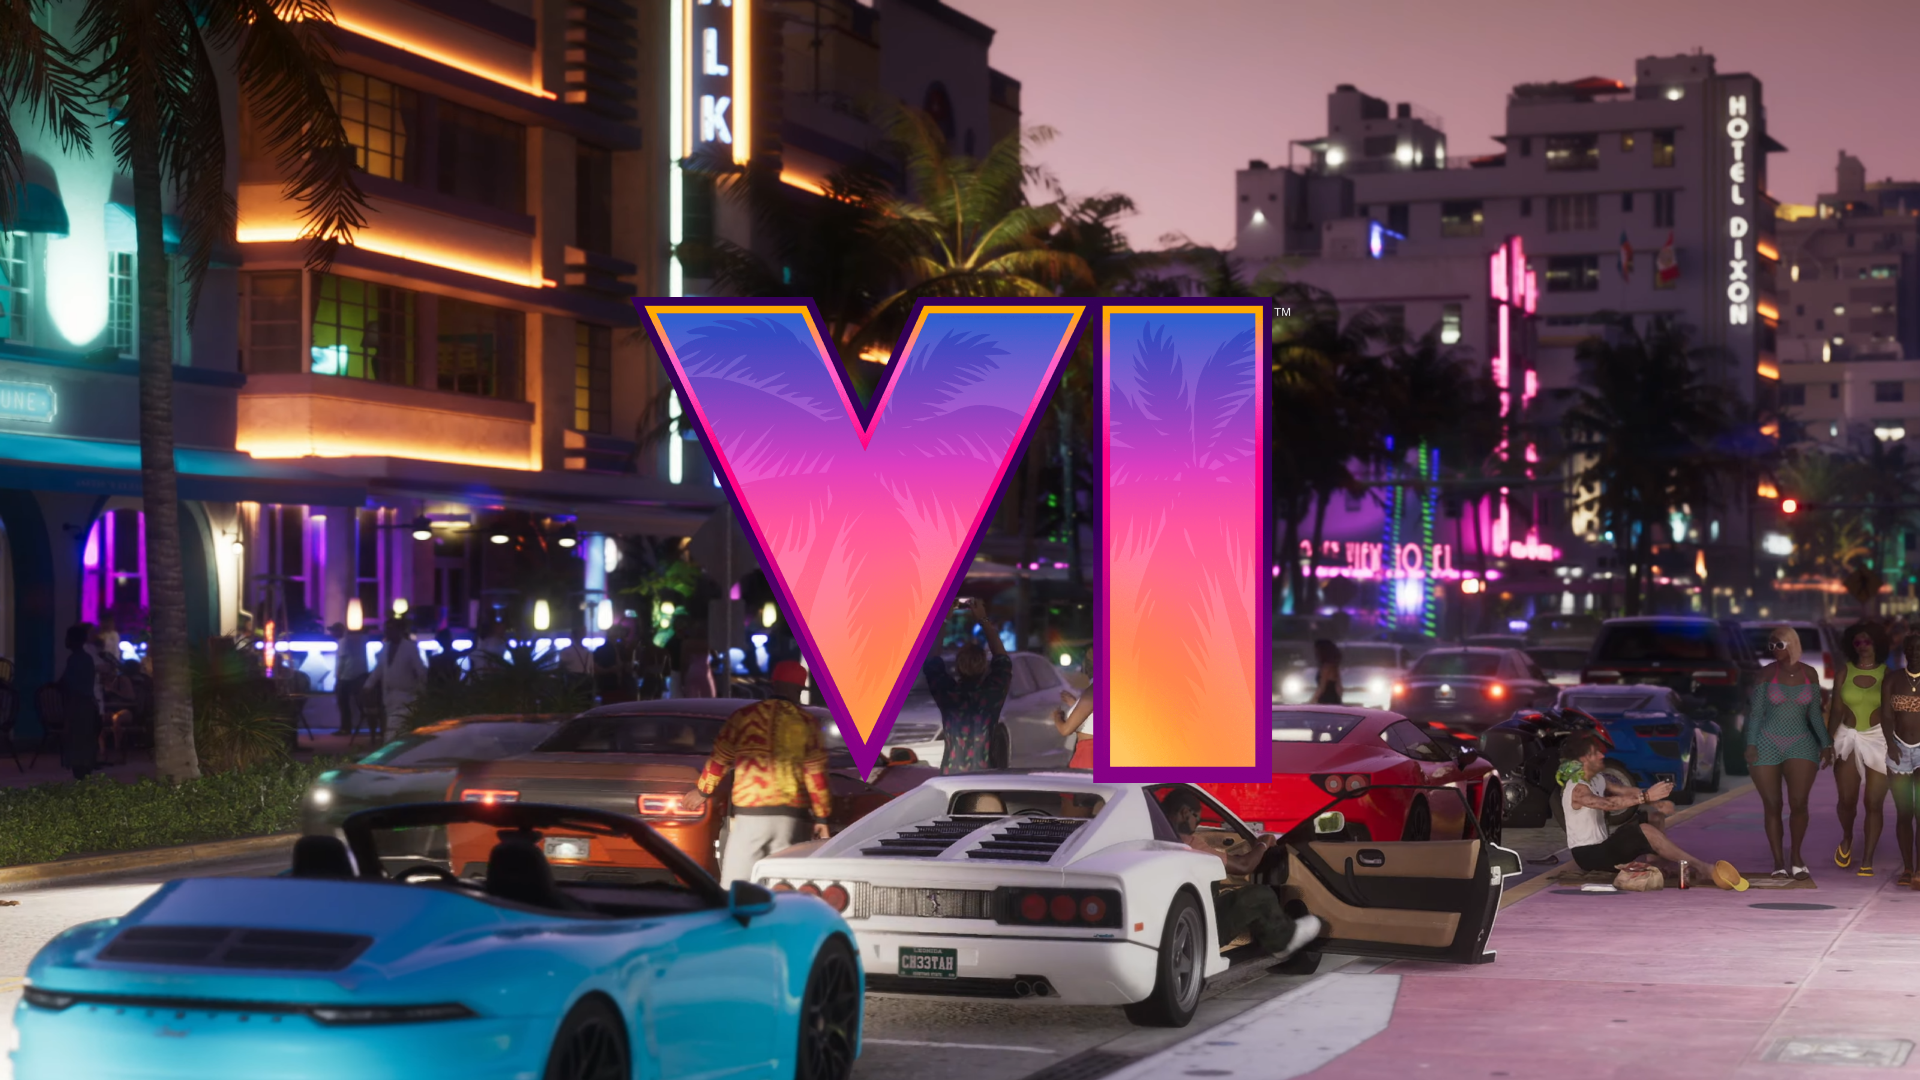 More information about "GTA VI Nieuws Roundup"